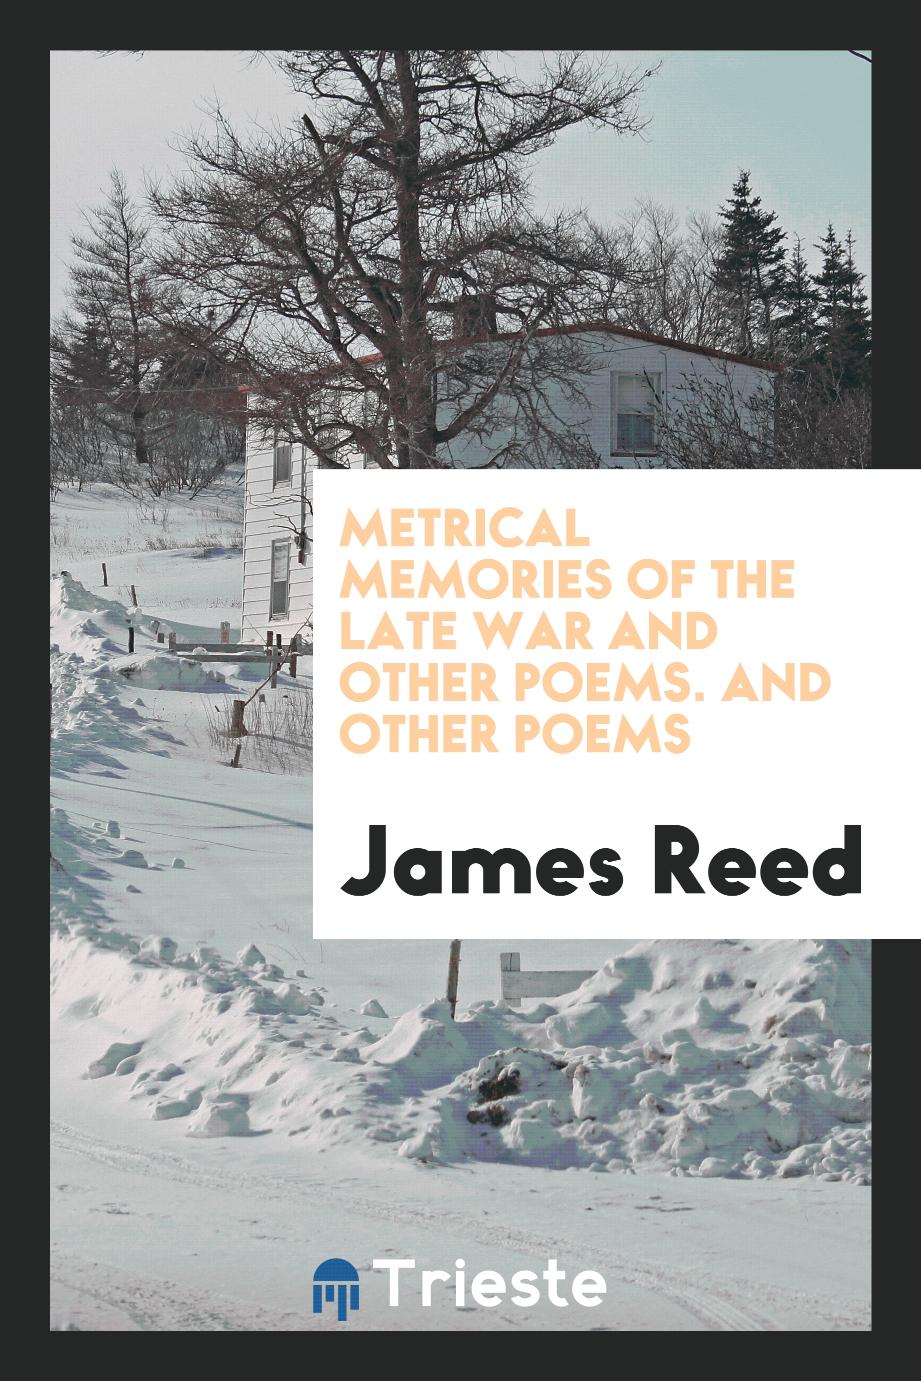 Metrical Memories of the Late War and Other Poems. And Other Poems